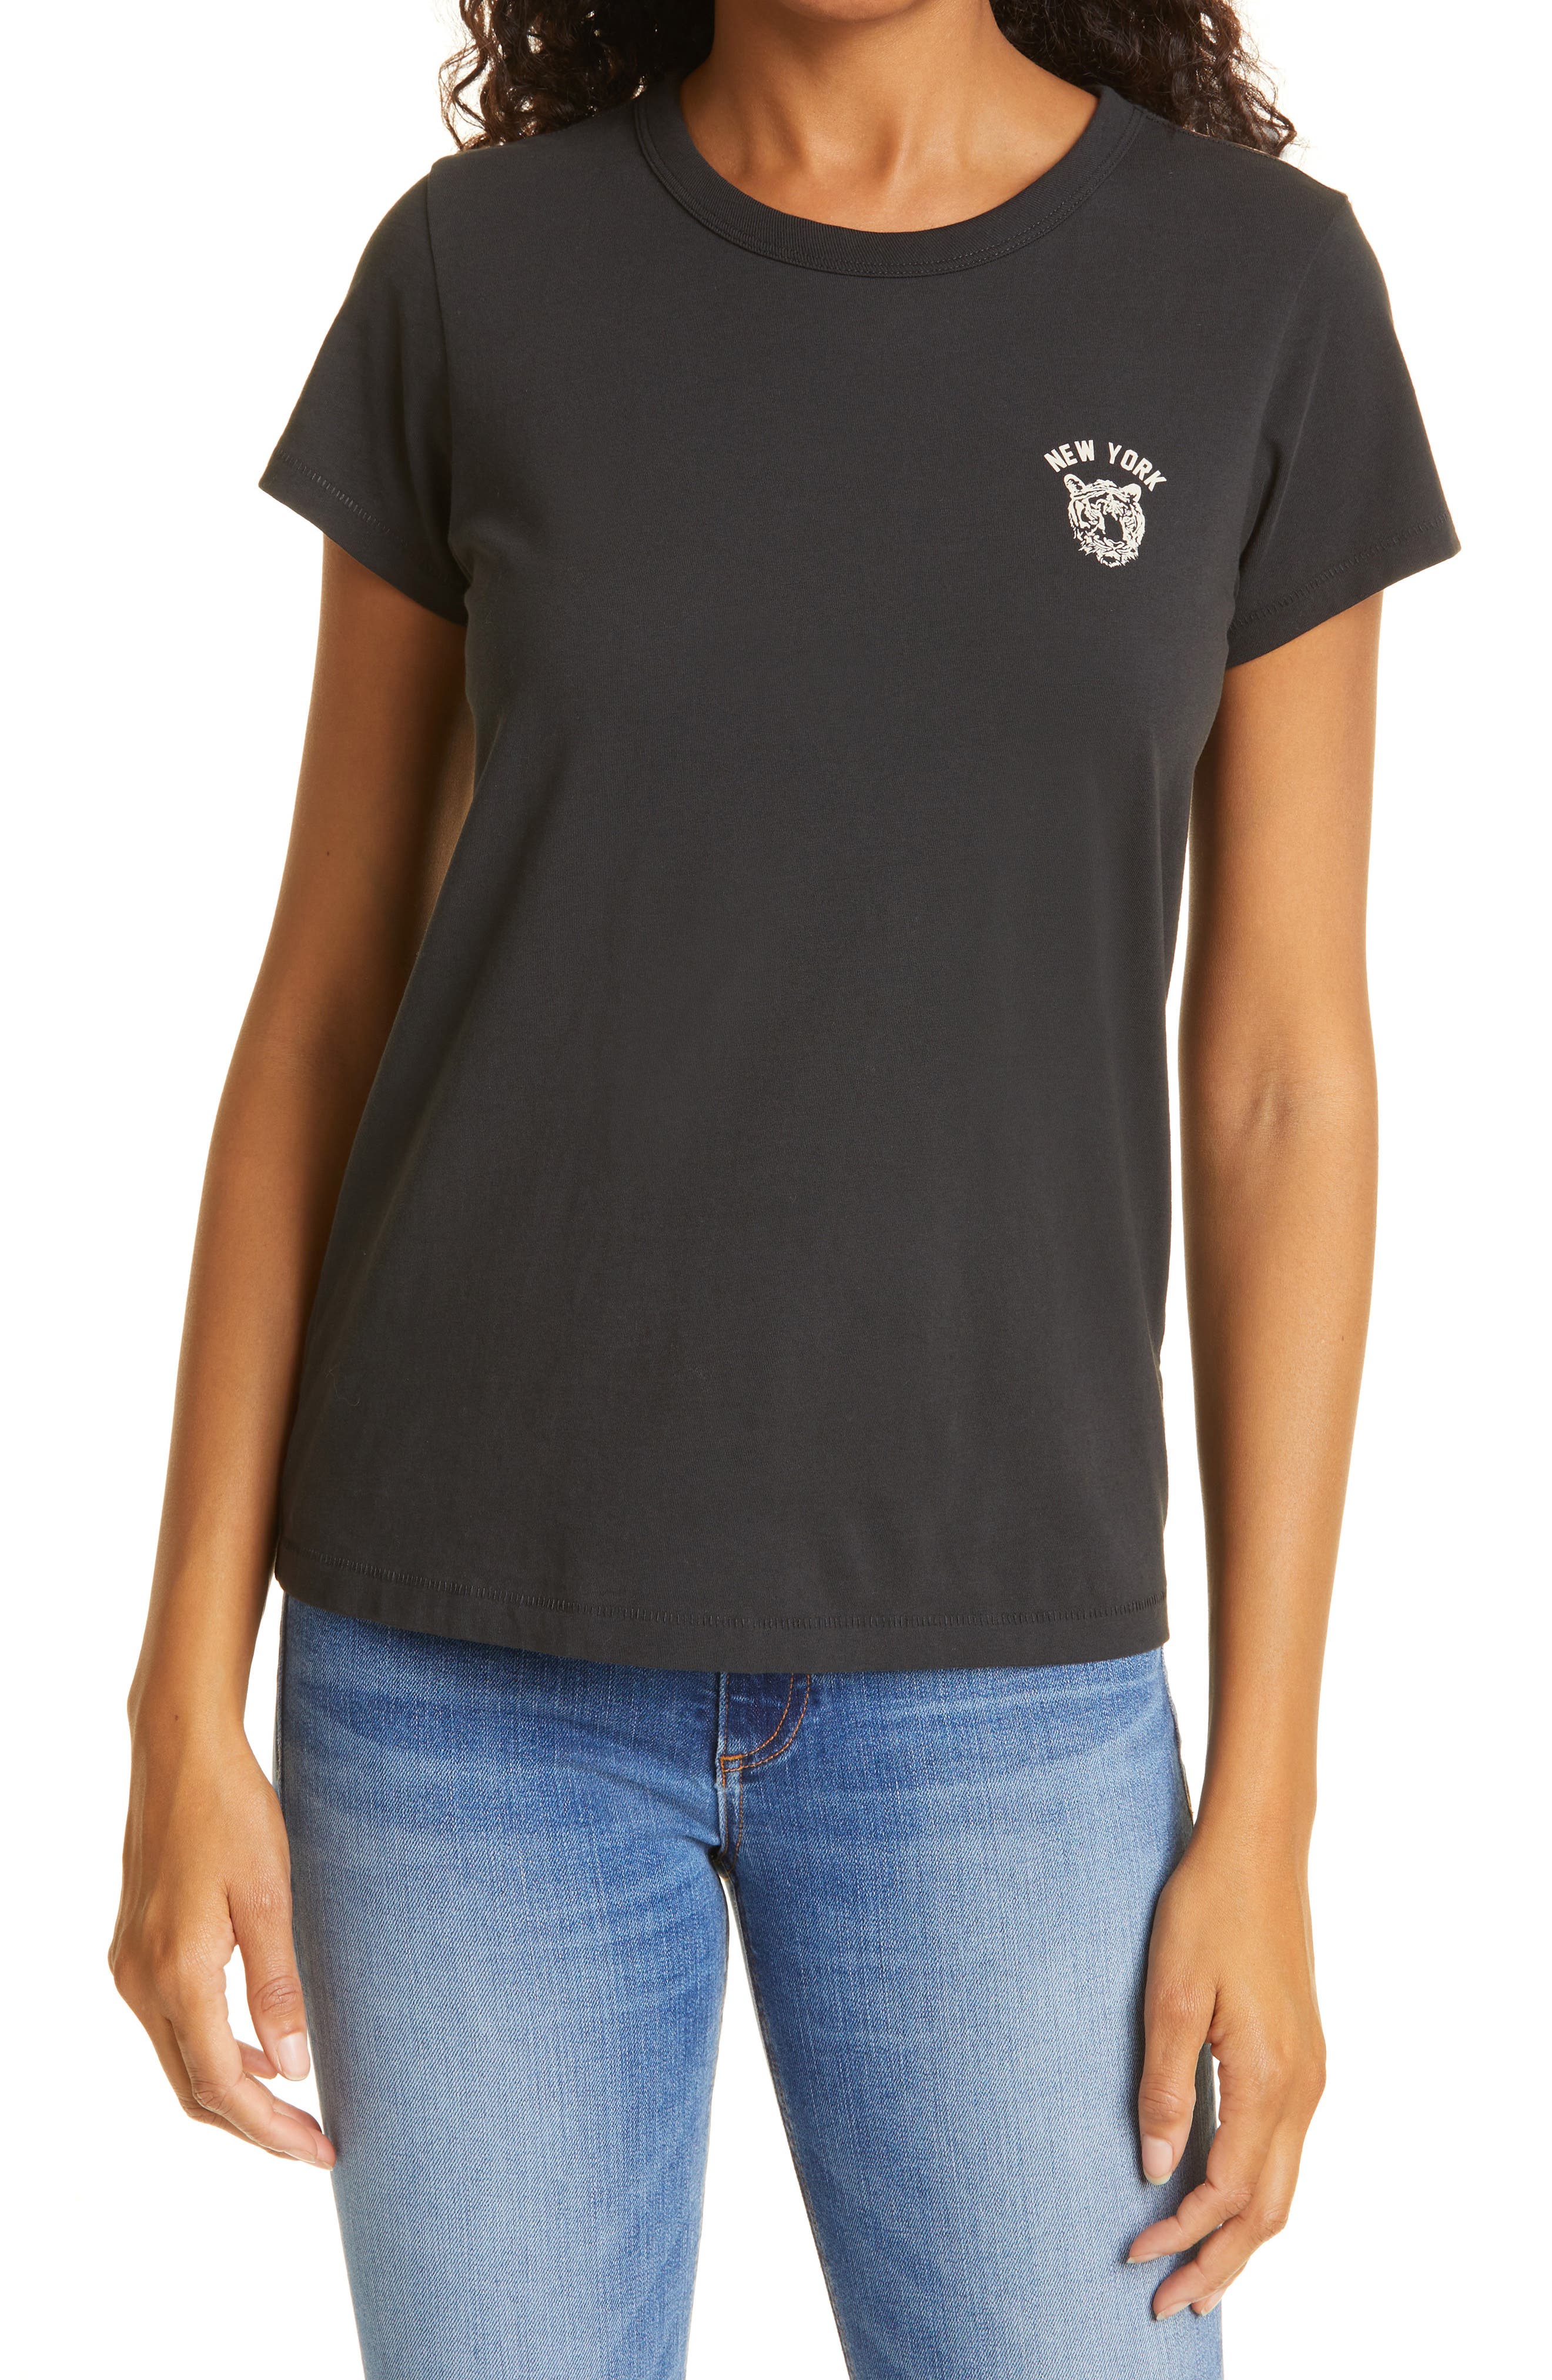 rag & bone Tiger Organic Cotton Graphic Tee in Black at Nordstrom, Size Xx-Small